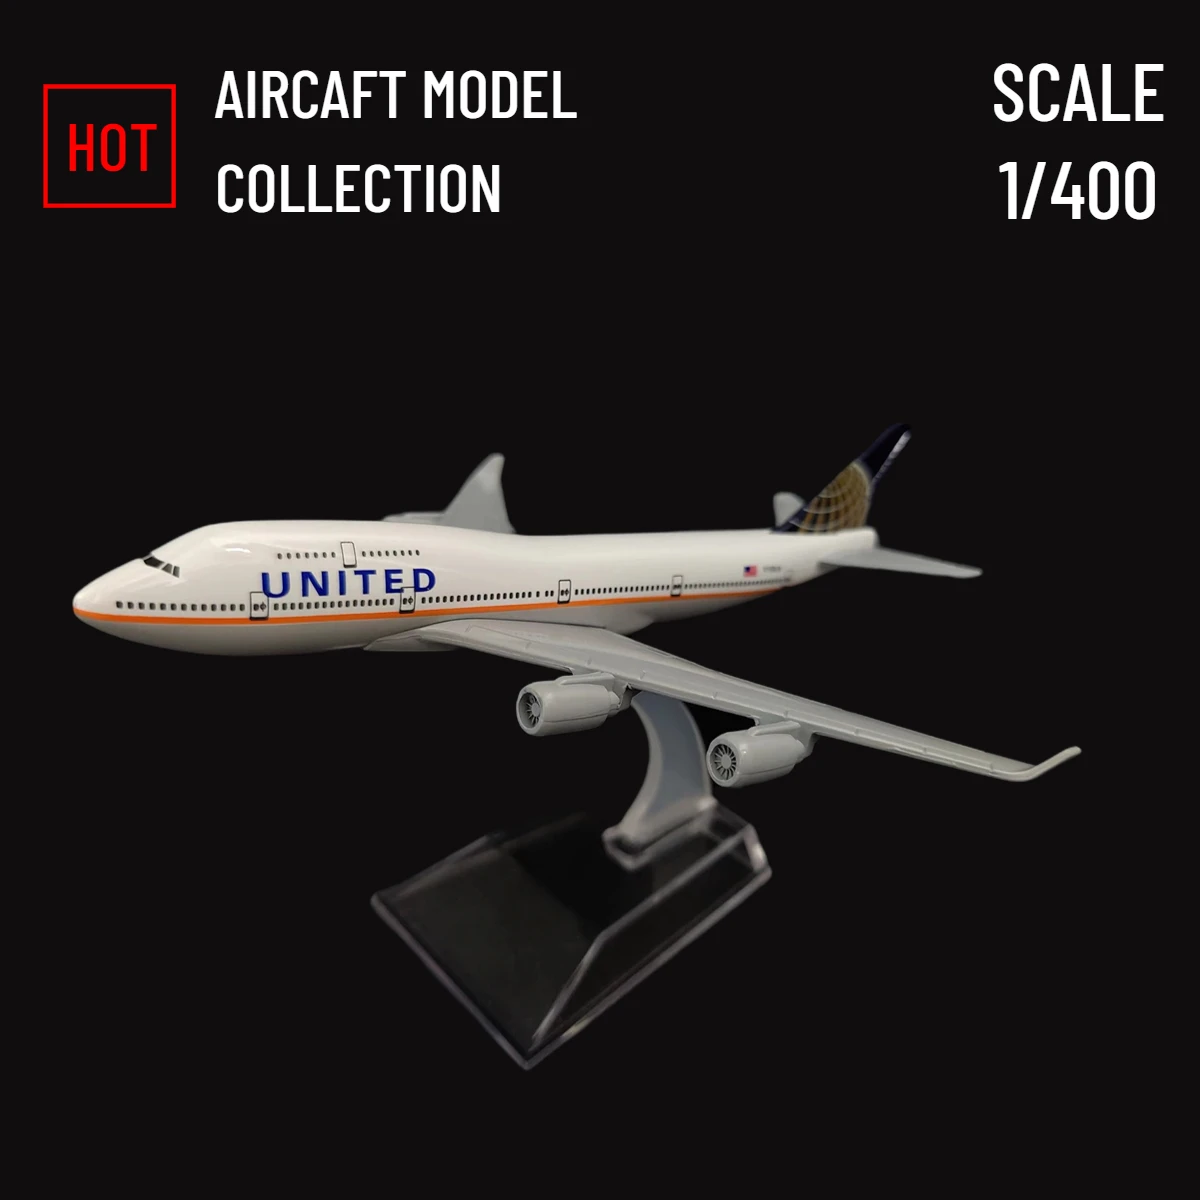 

Scale 1:400 Metal Aircraft Replica, United B747 Plane Boeing Airbus Airplane Model Miniature, Aviation Gift Toy for Boy